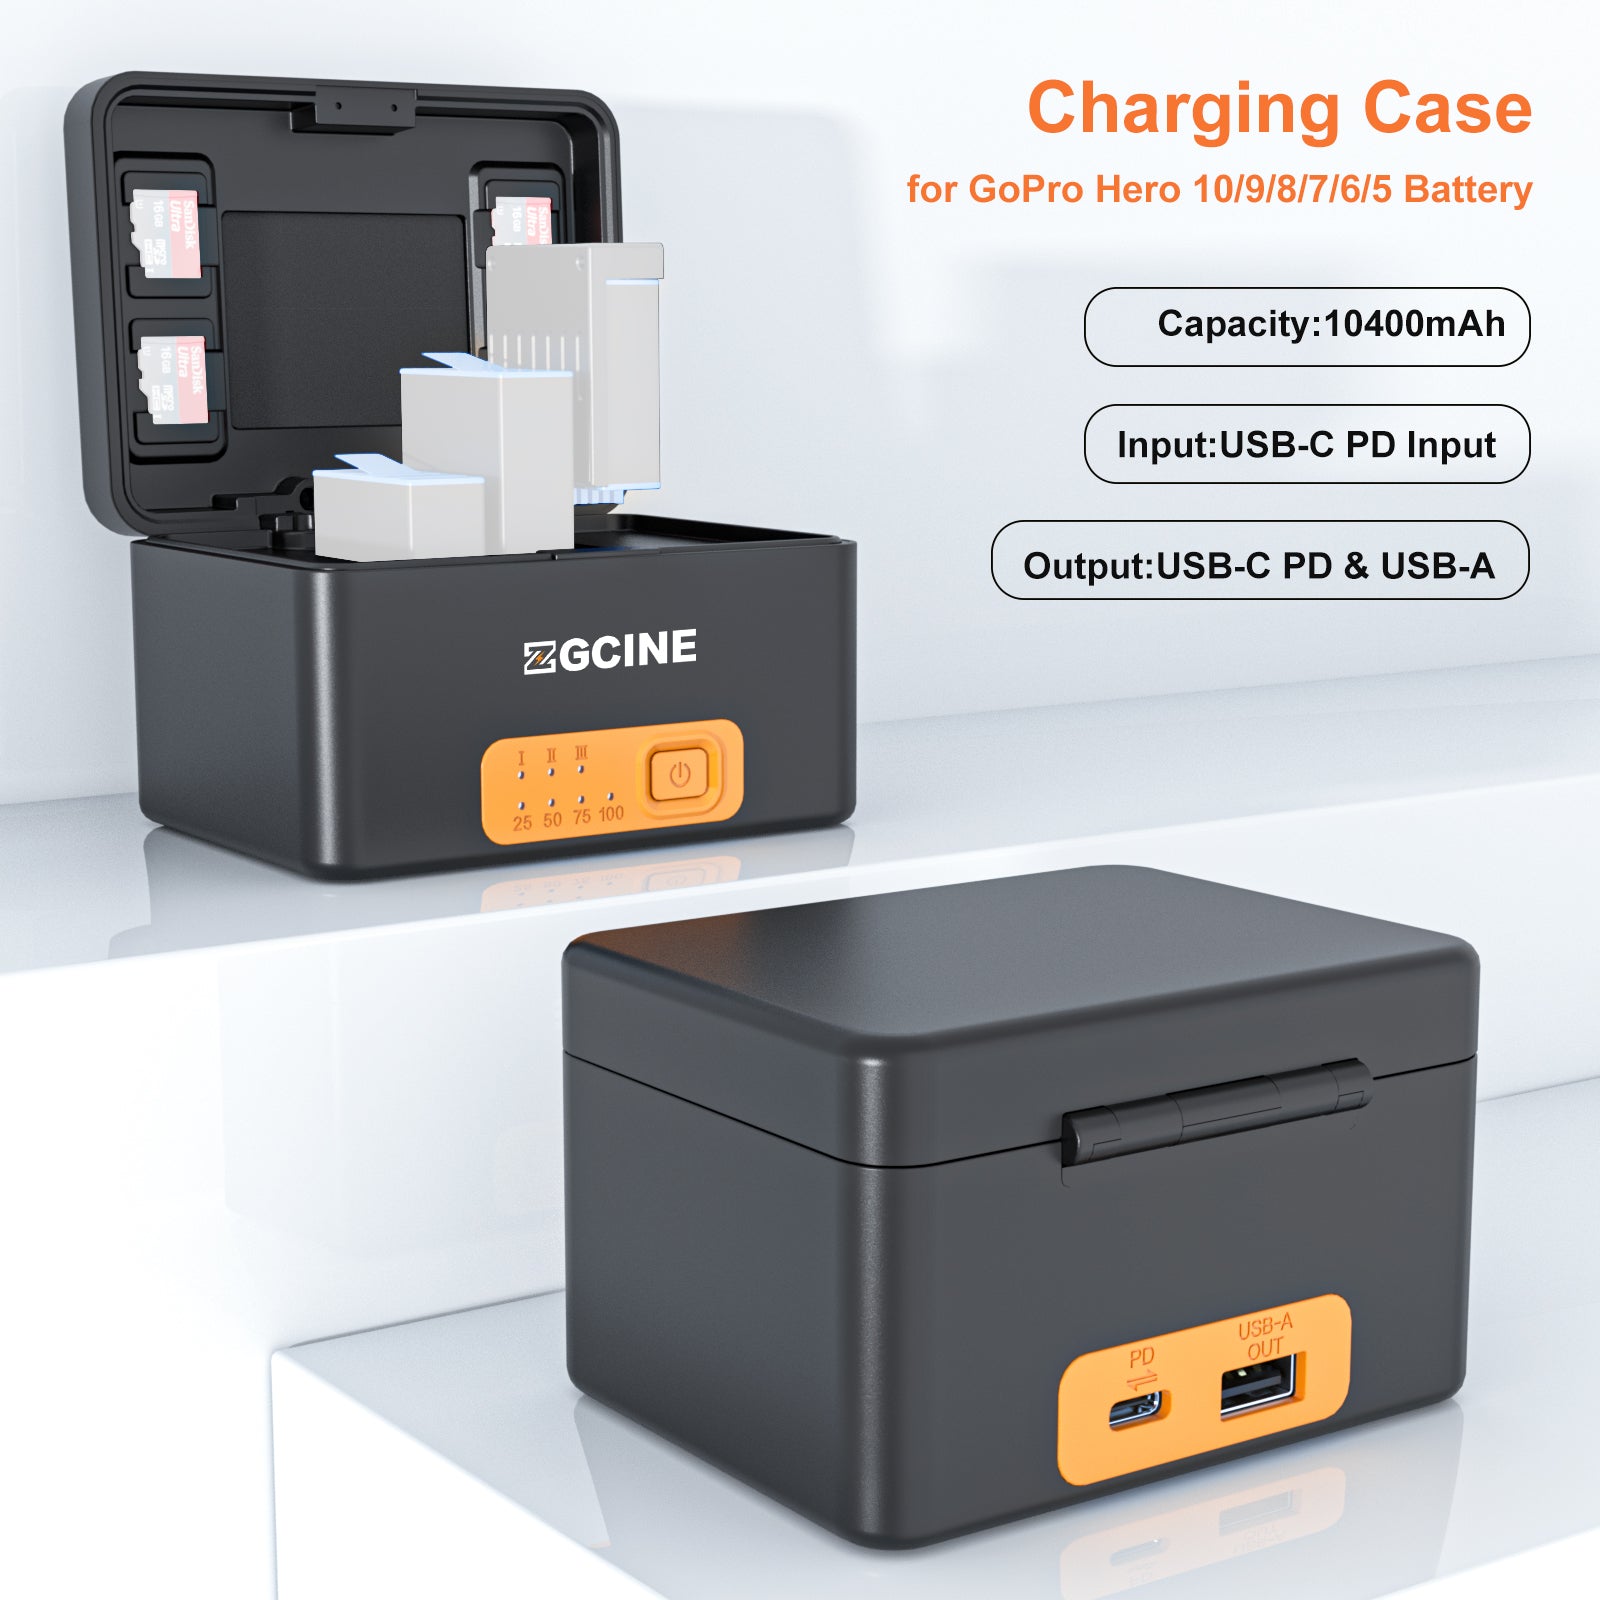 ZGCINE PS-G10 Charging Case for GoPro Battery 3 C